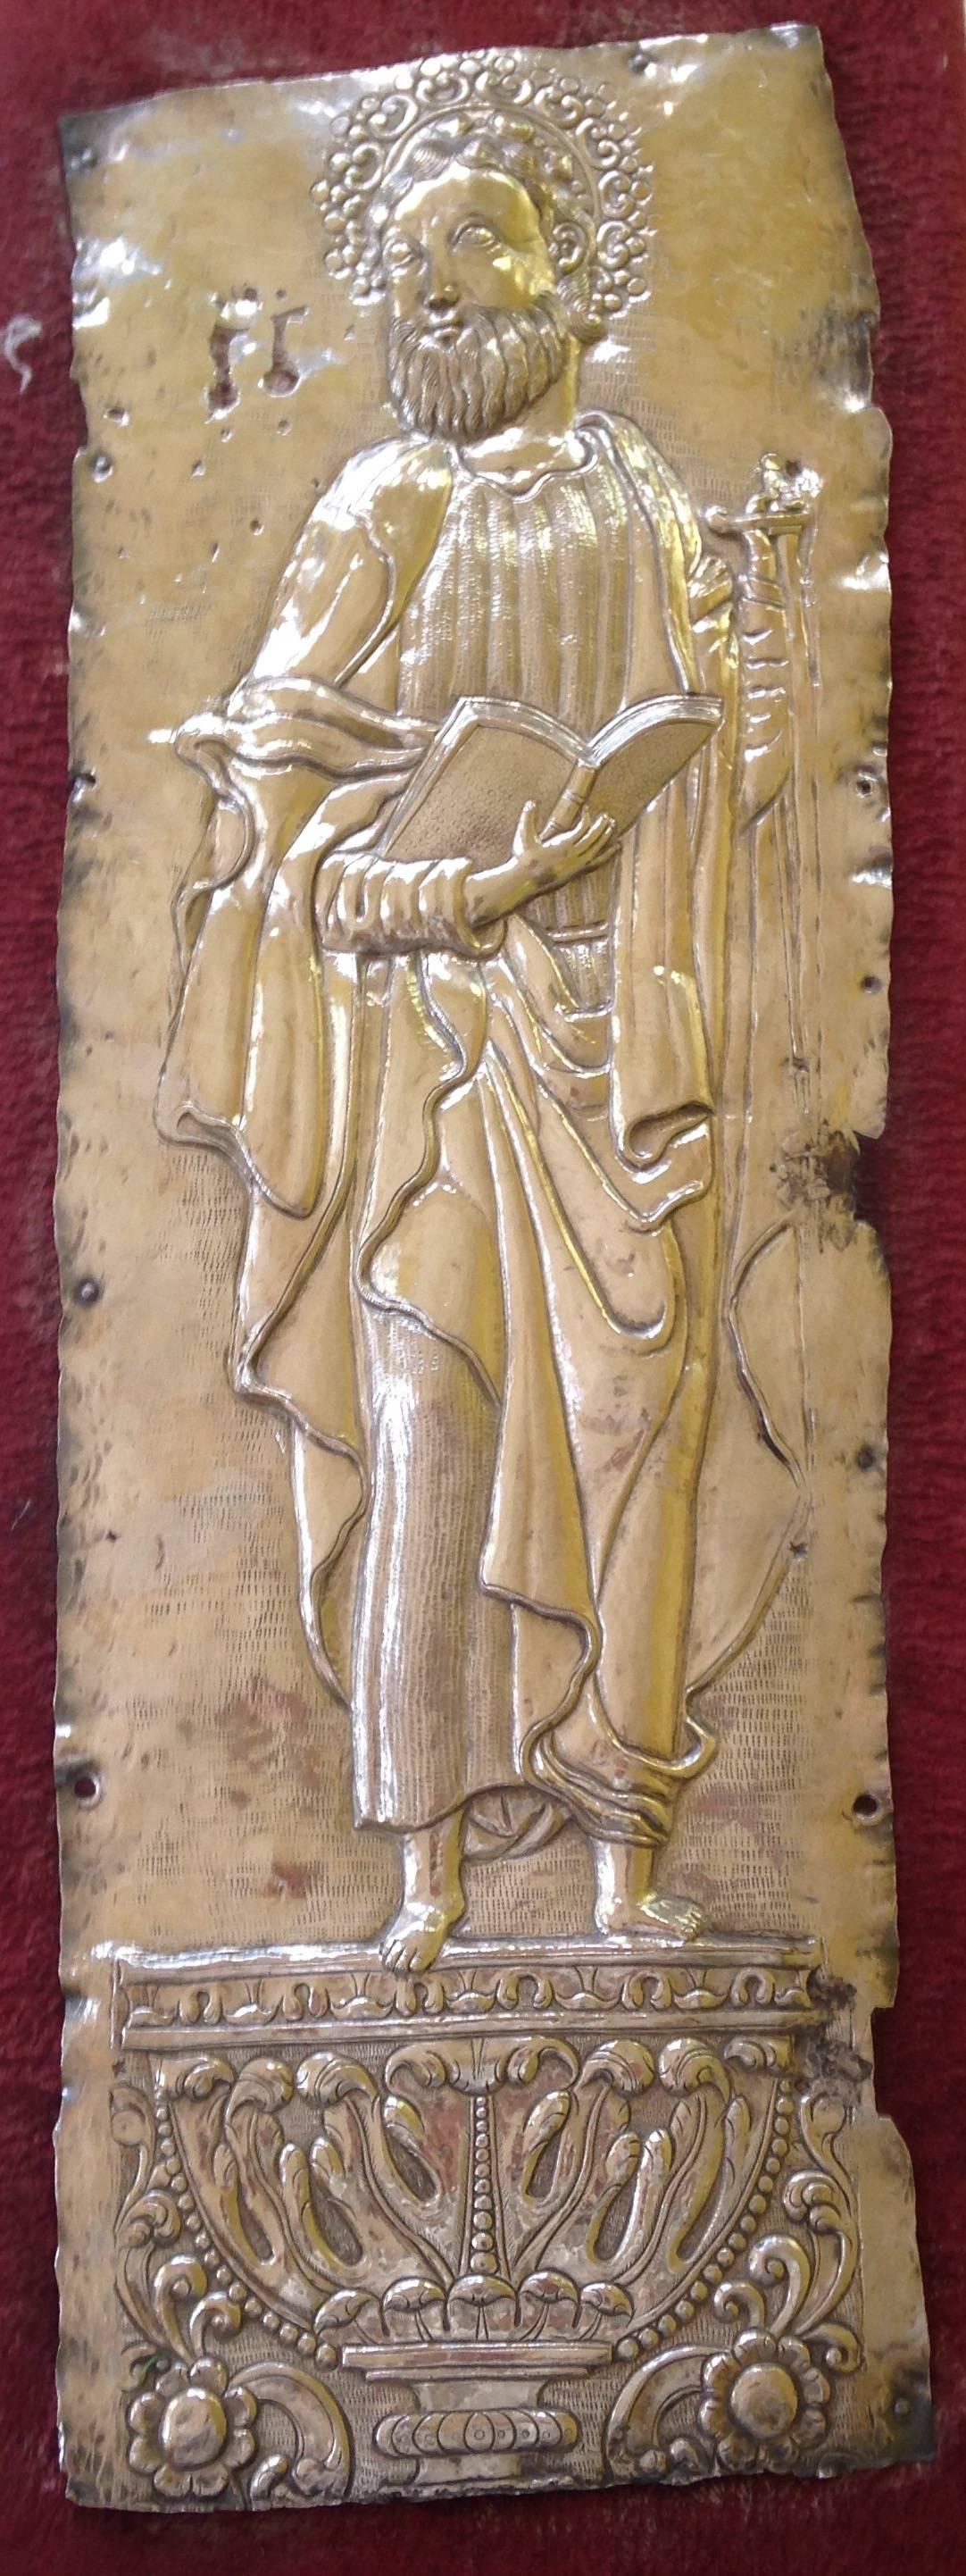 A SPANISH COLONIAL SILVER PLAQUE OF SAINT JOHN THE EVANGELIST - Silver Figurative Sculpture by Unknown